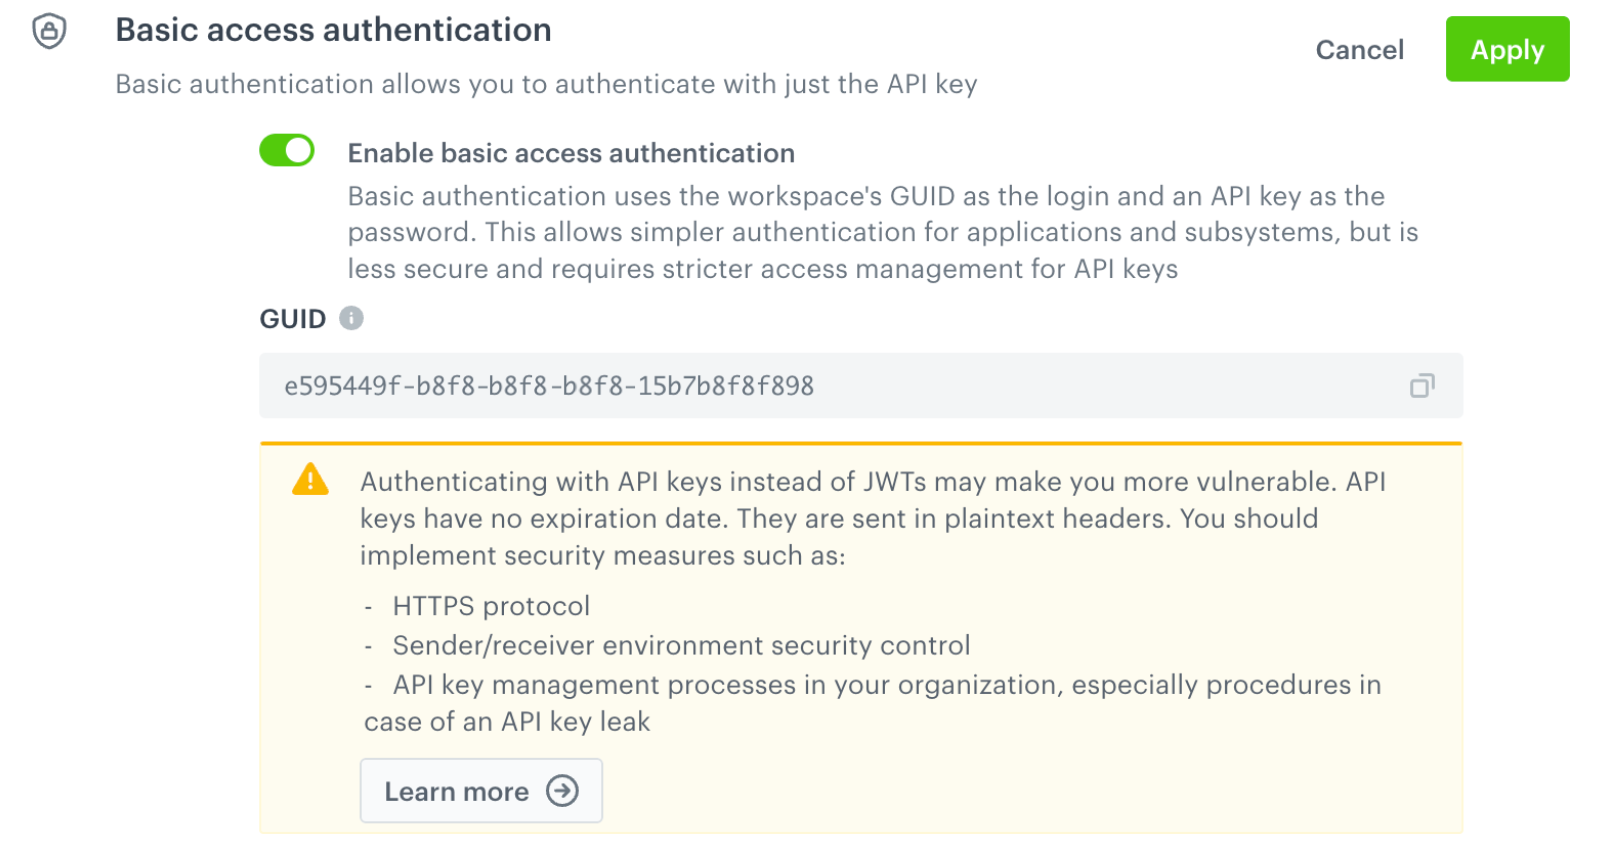 Basic authentication enabled, the workspace GUID is shown